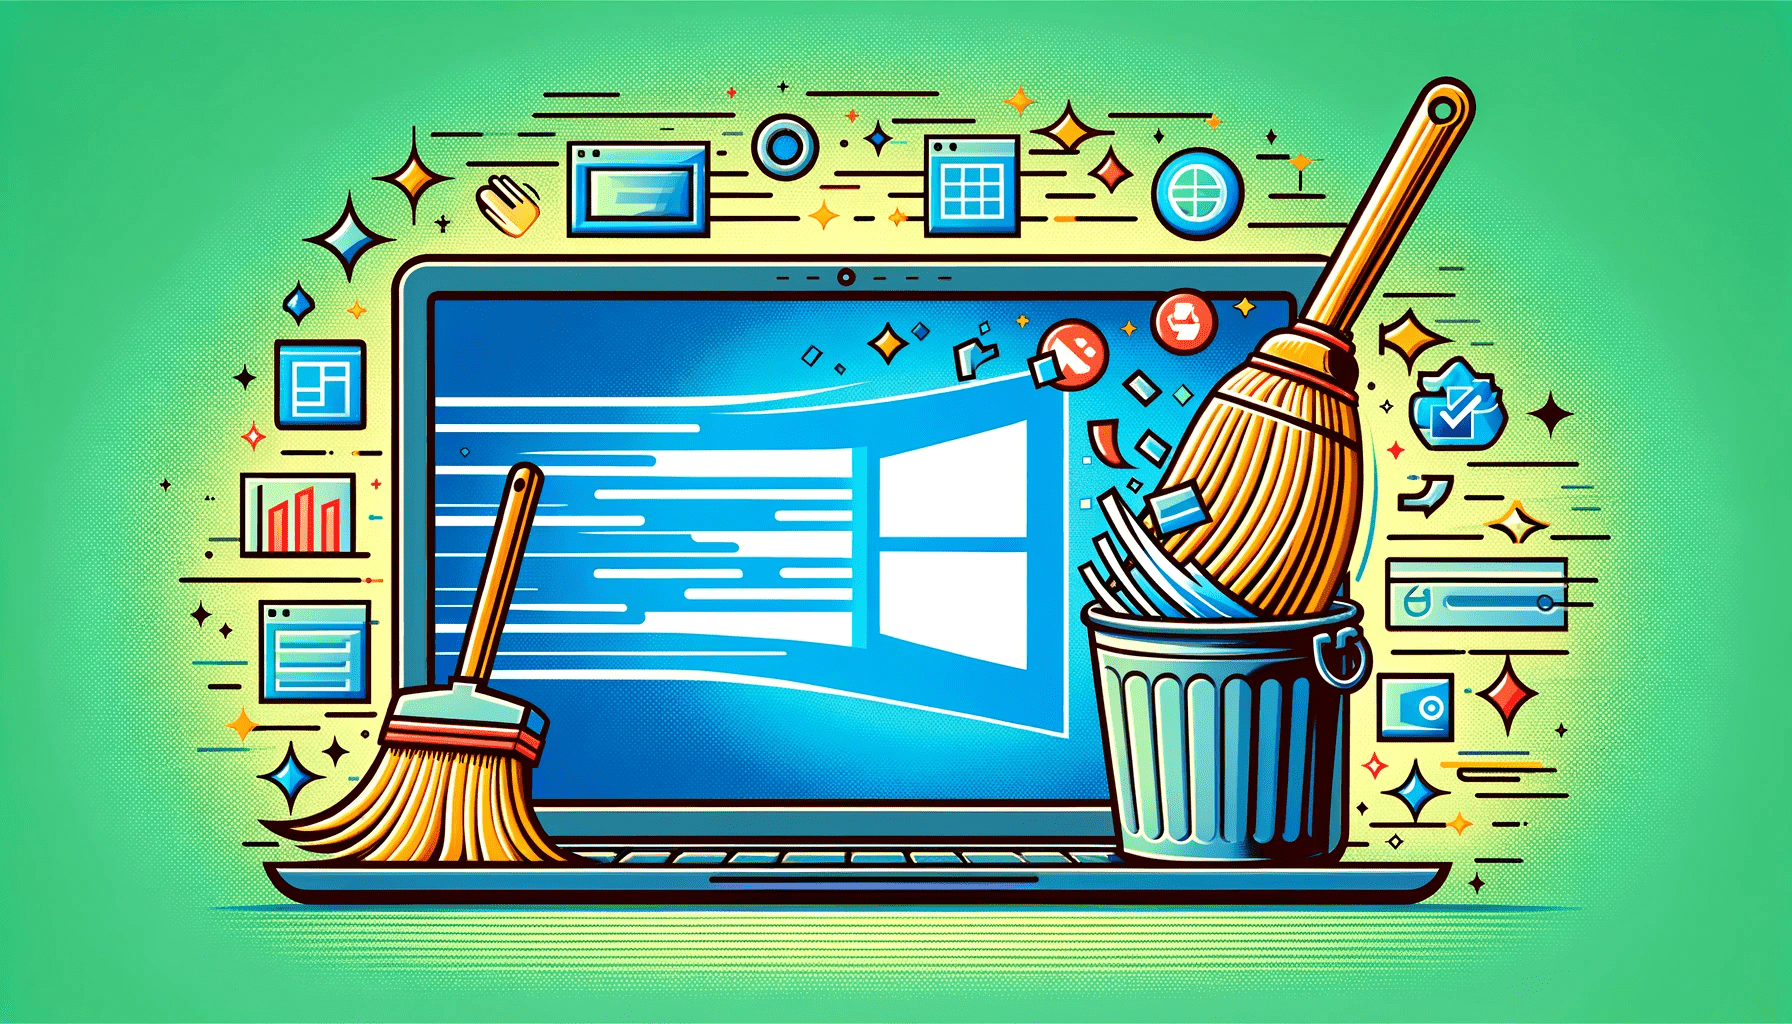 Windows Update Cleanup: How to Delete Old Windows Update Files